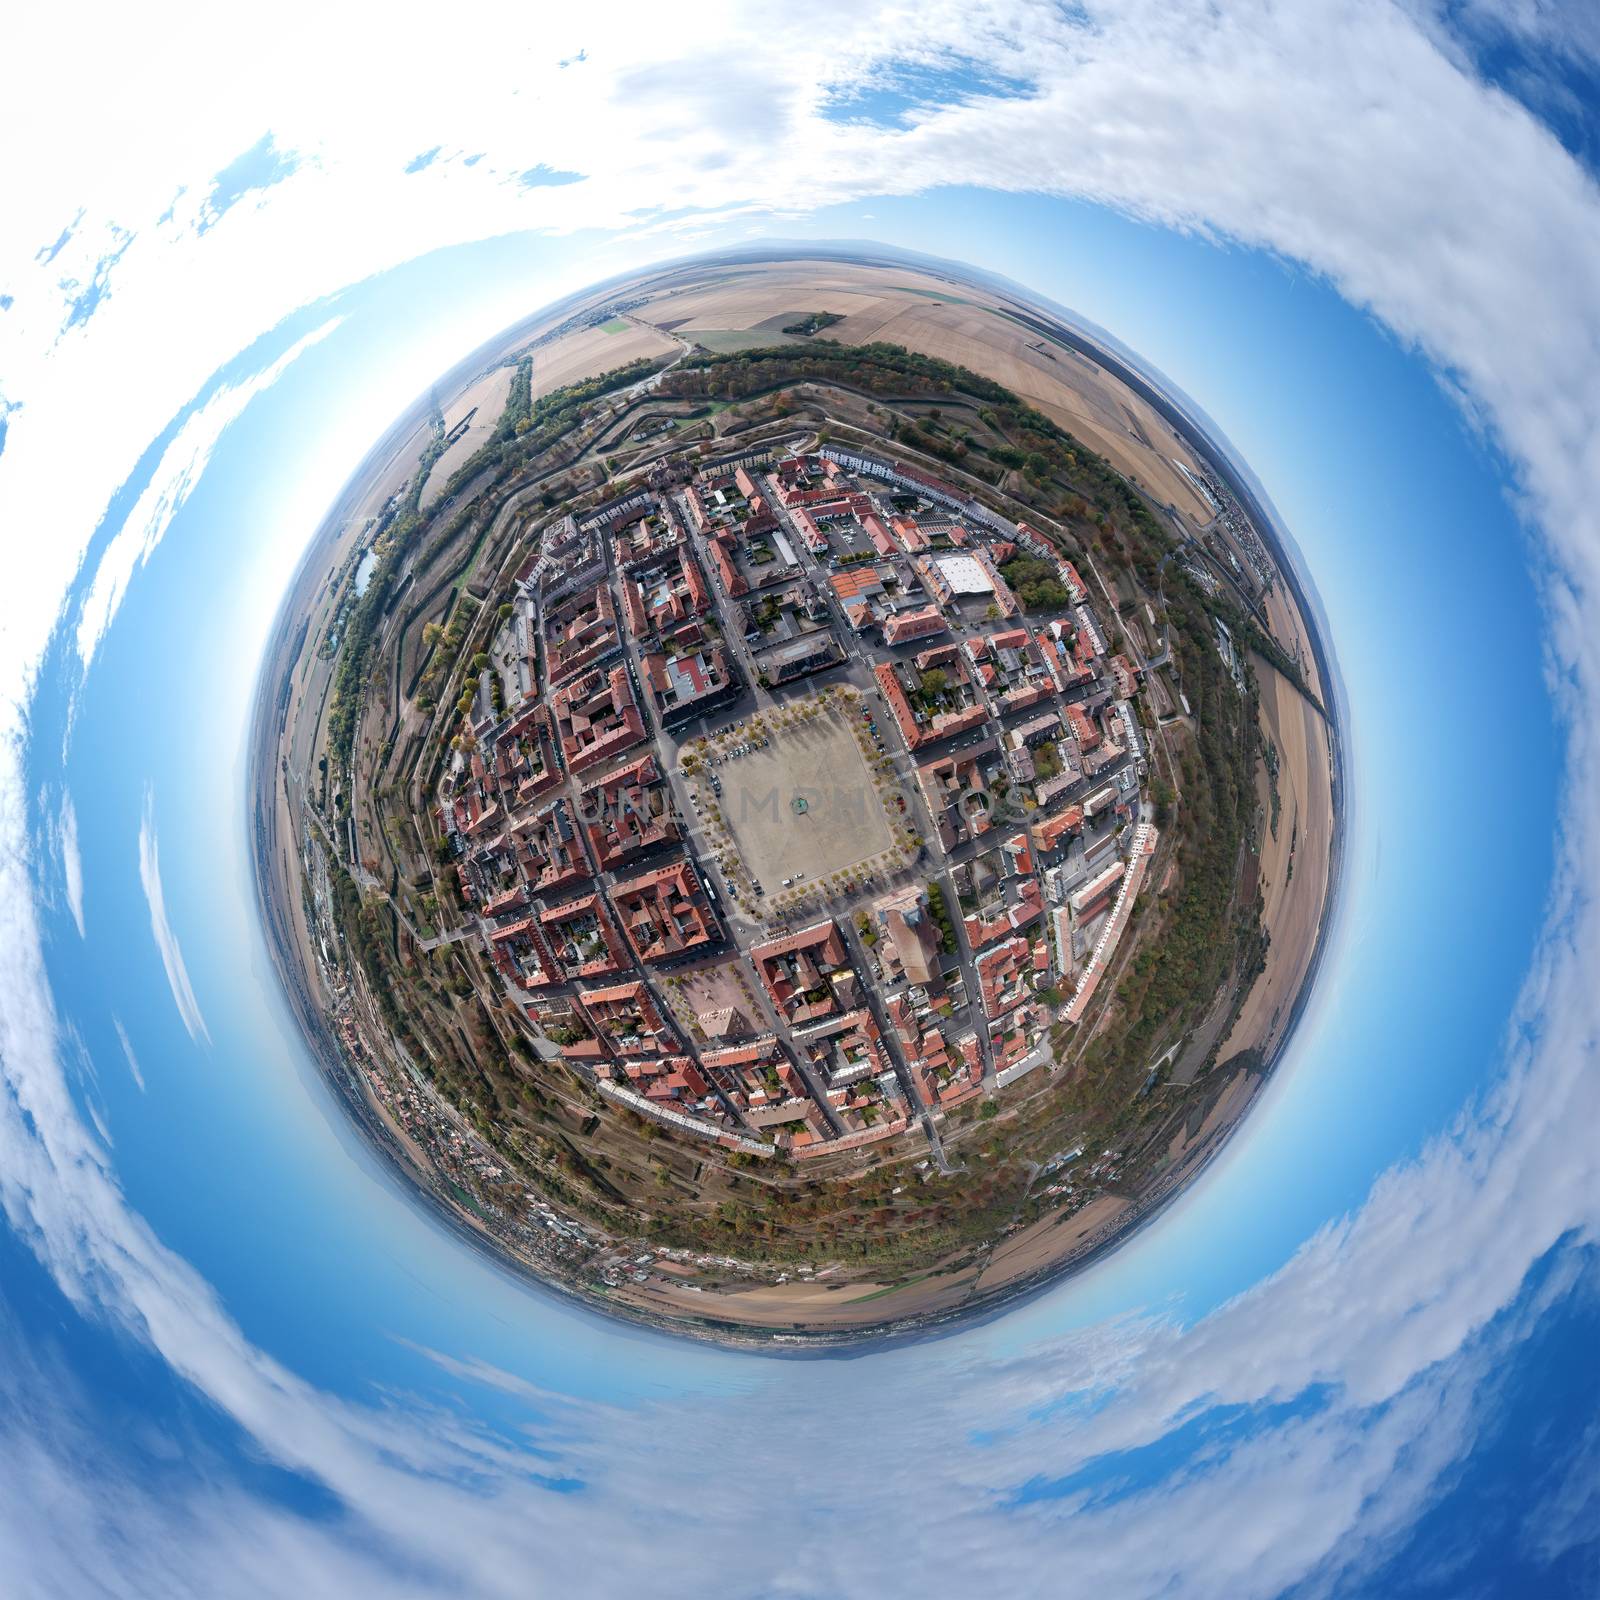 little planet Neuf Brisach Alsace France by magann